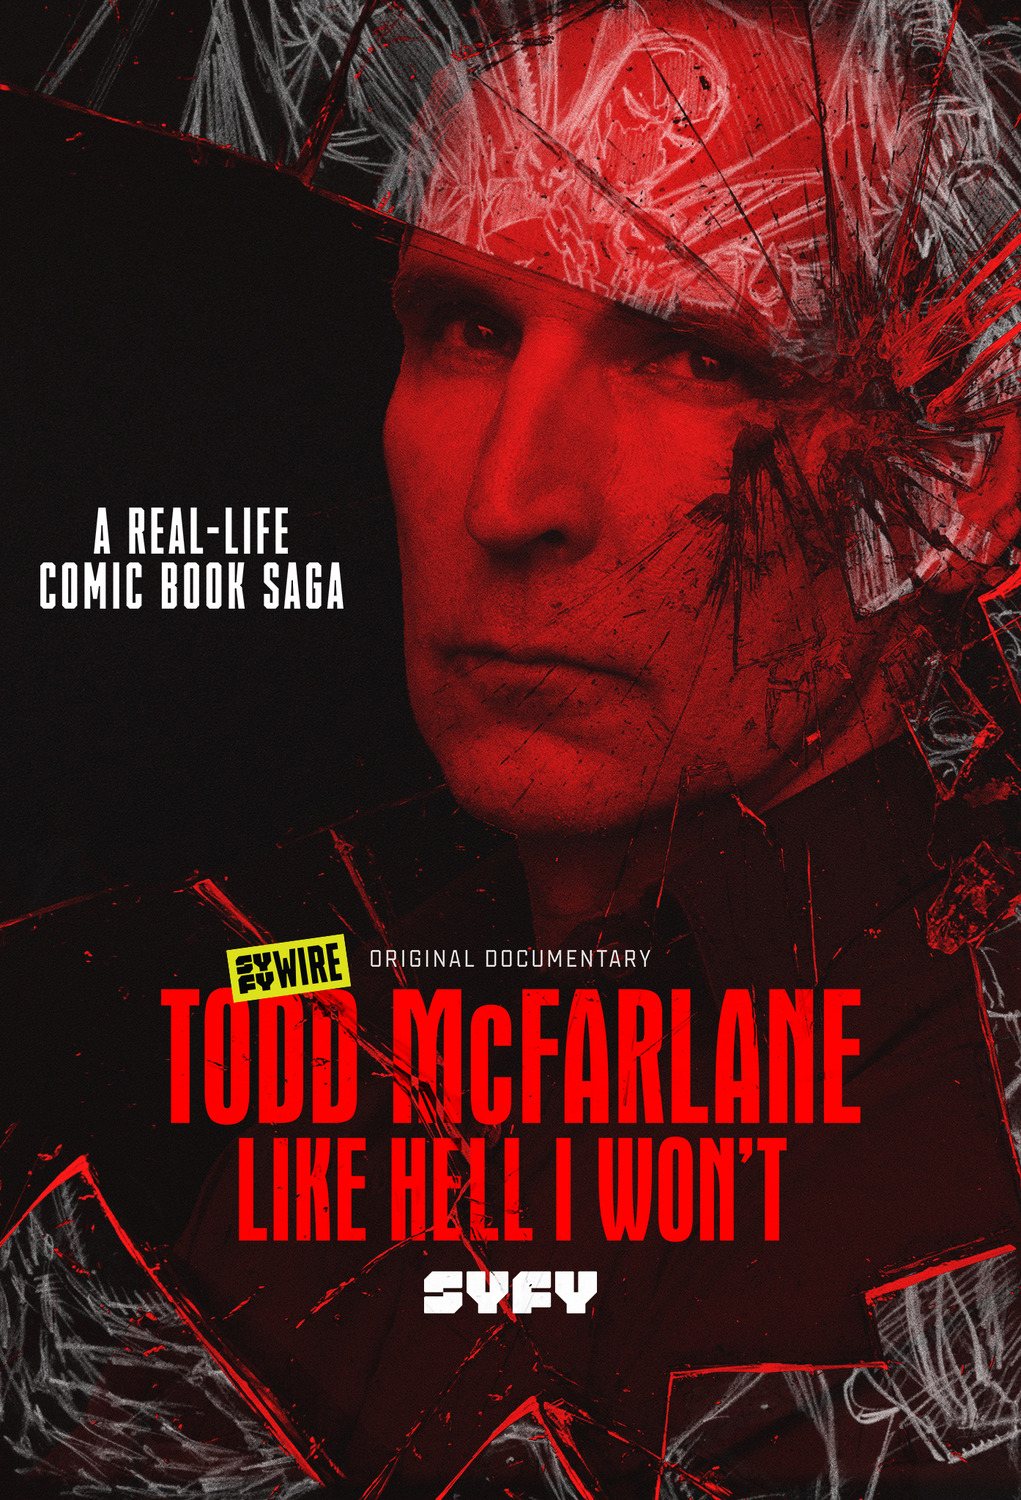 Extra Large TV Poster Image for Todd McFarlane: Like Hell I Won't 